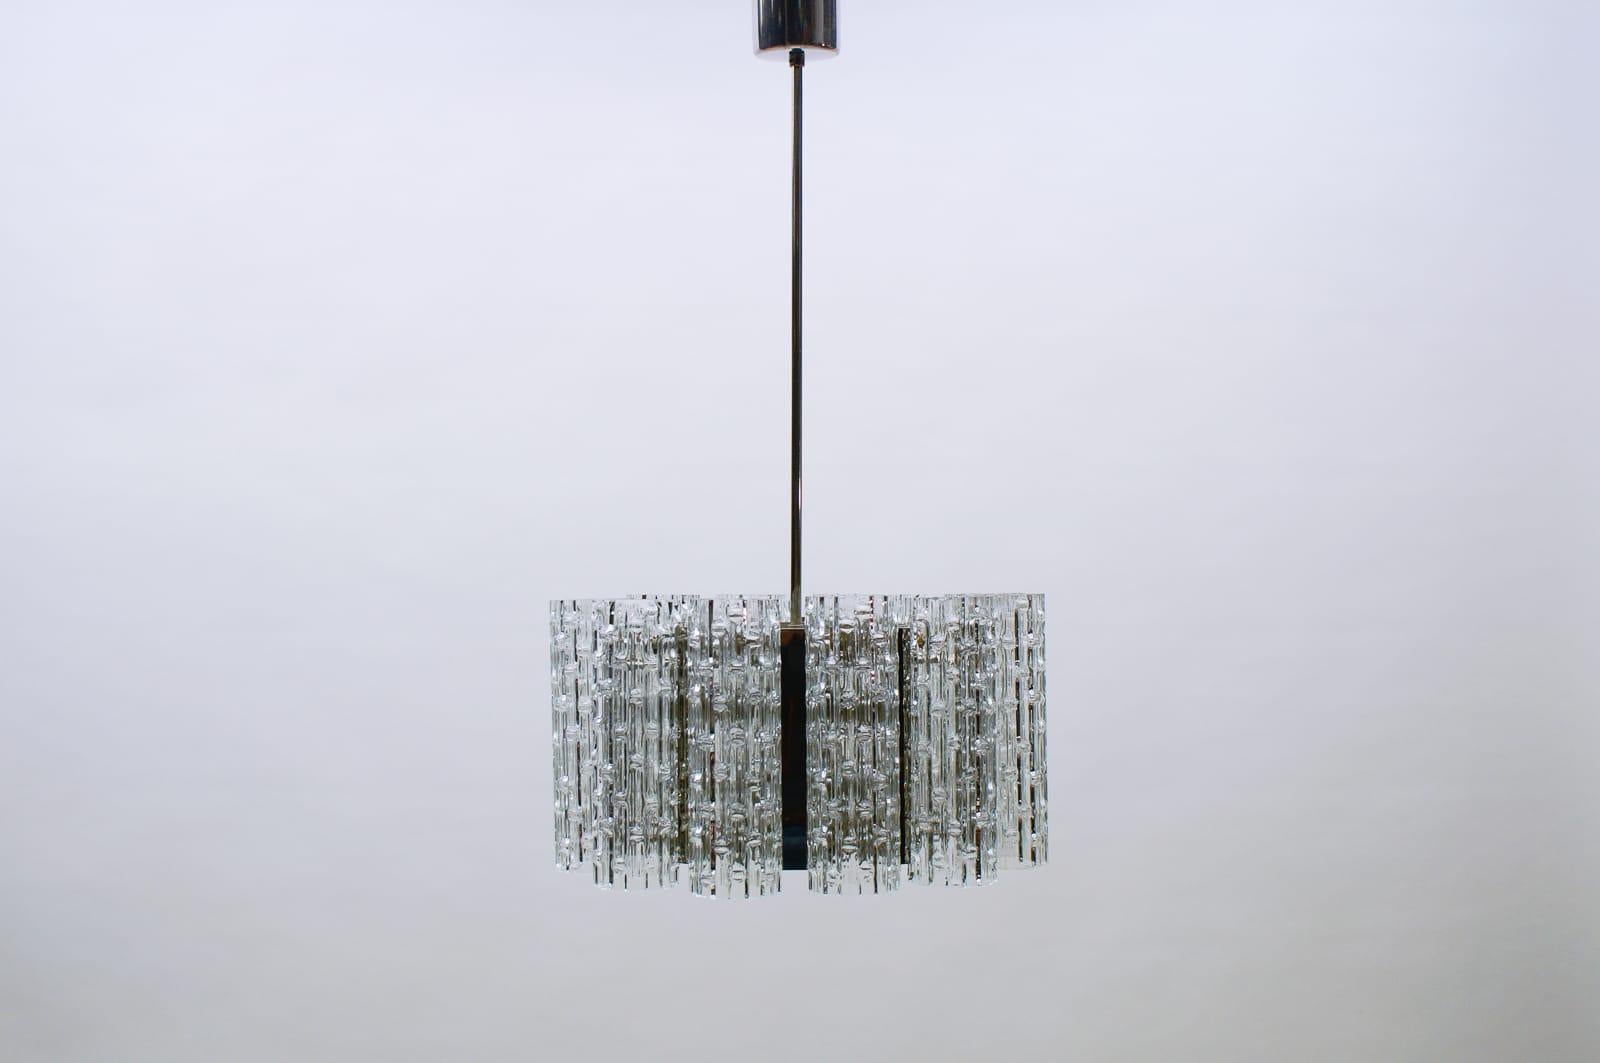 Elegant chandelier produced in Germany in the 1960s. The lamp has its original wiring and requires 12x E14 Edison screw fit bulbs.